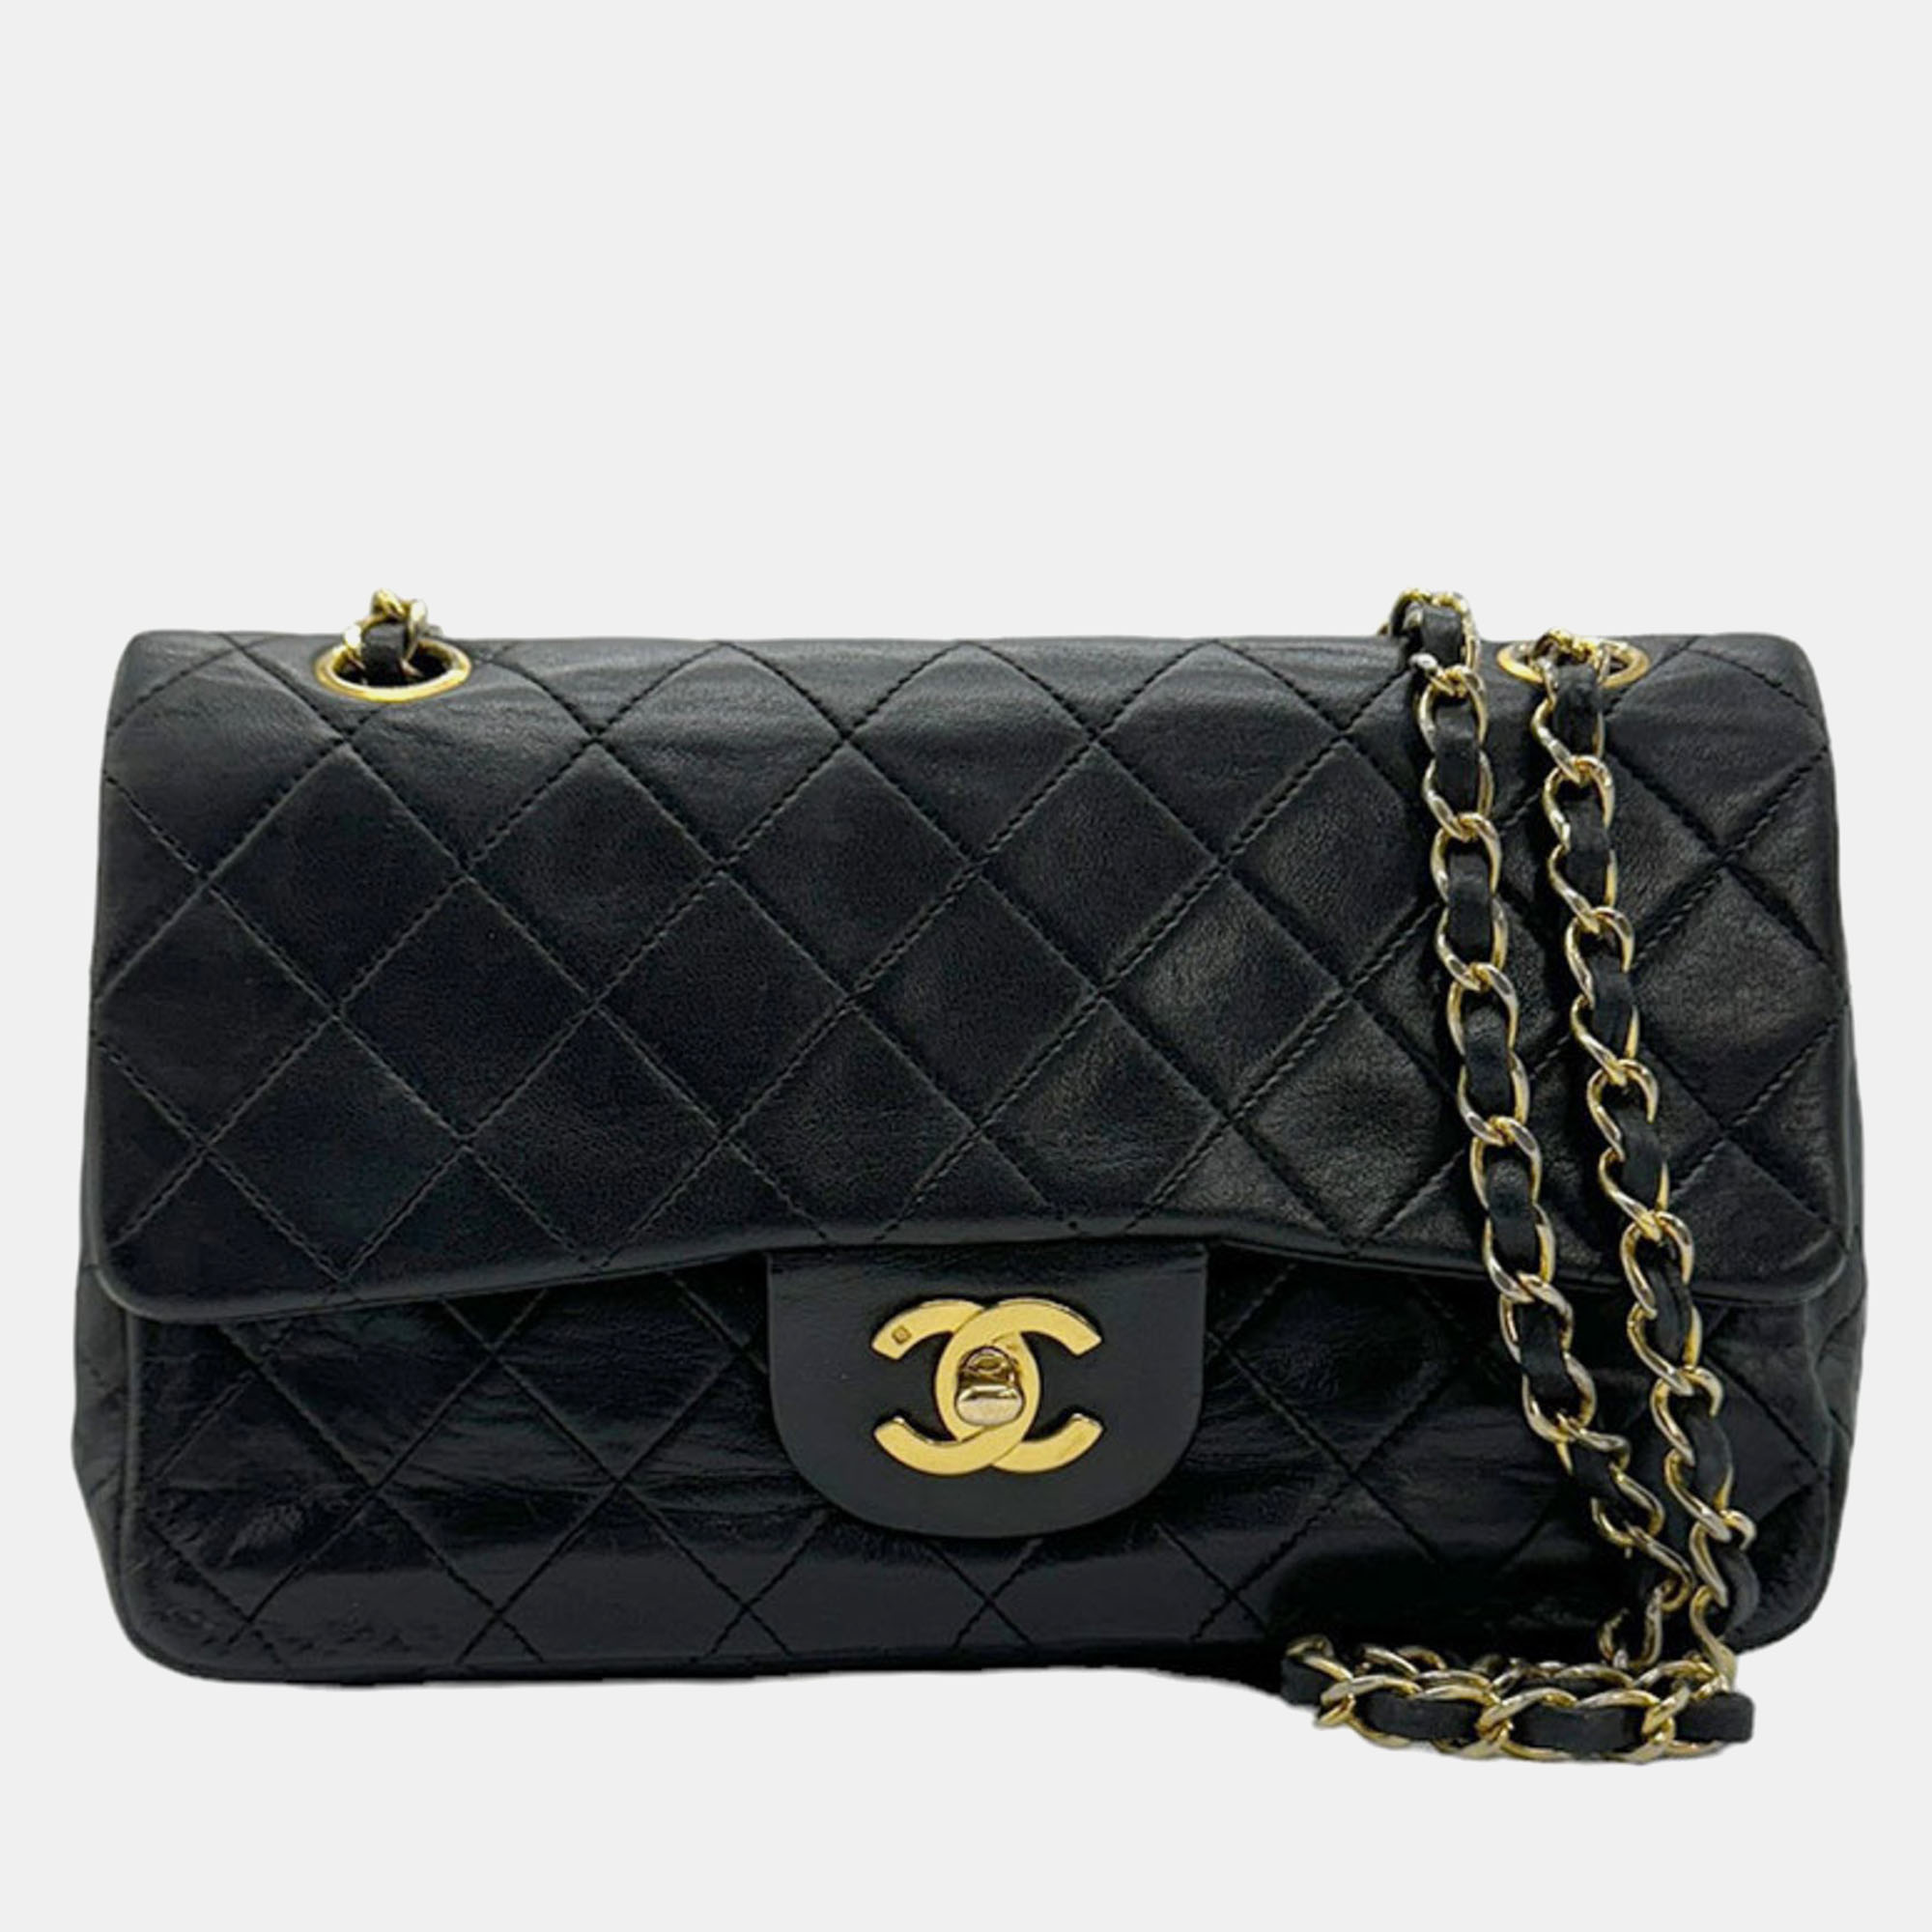 Chanel black small classic lambskin double flap bag